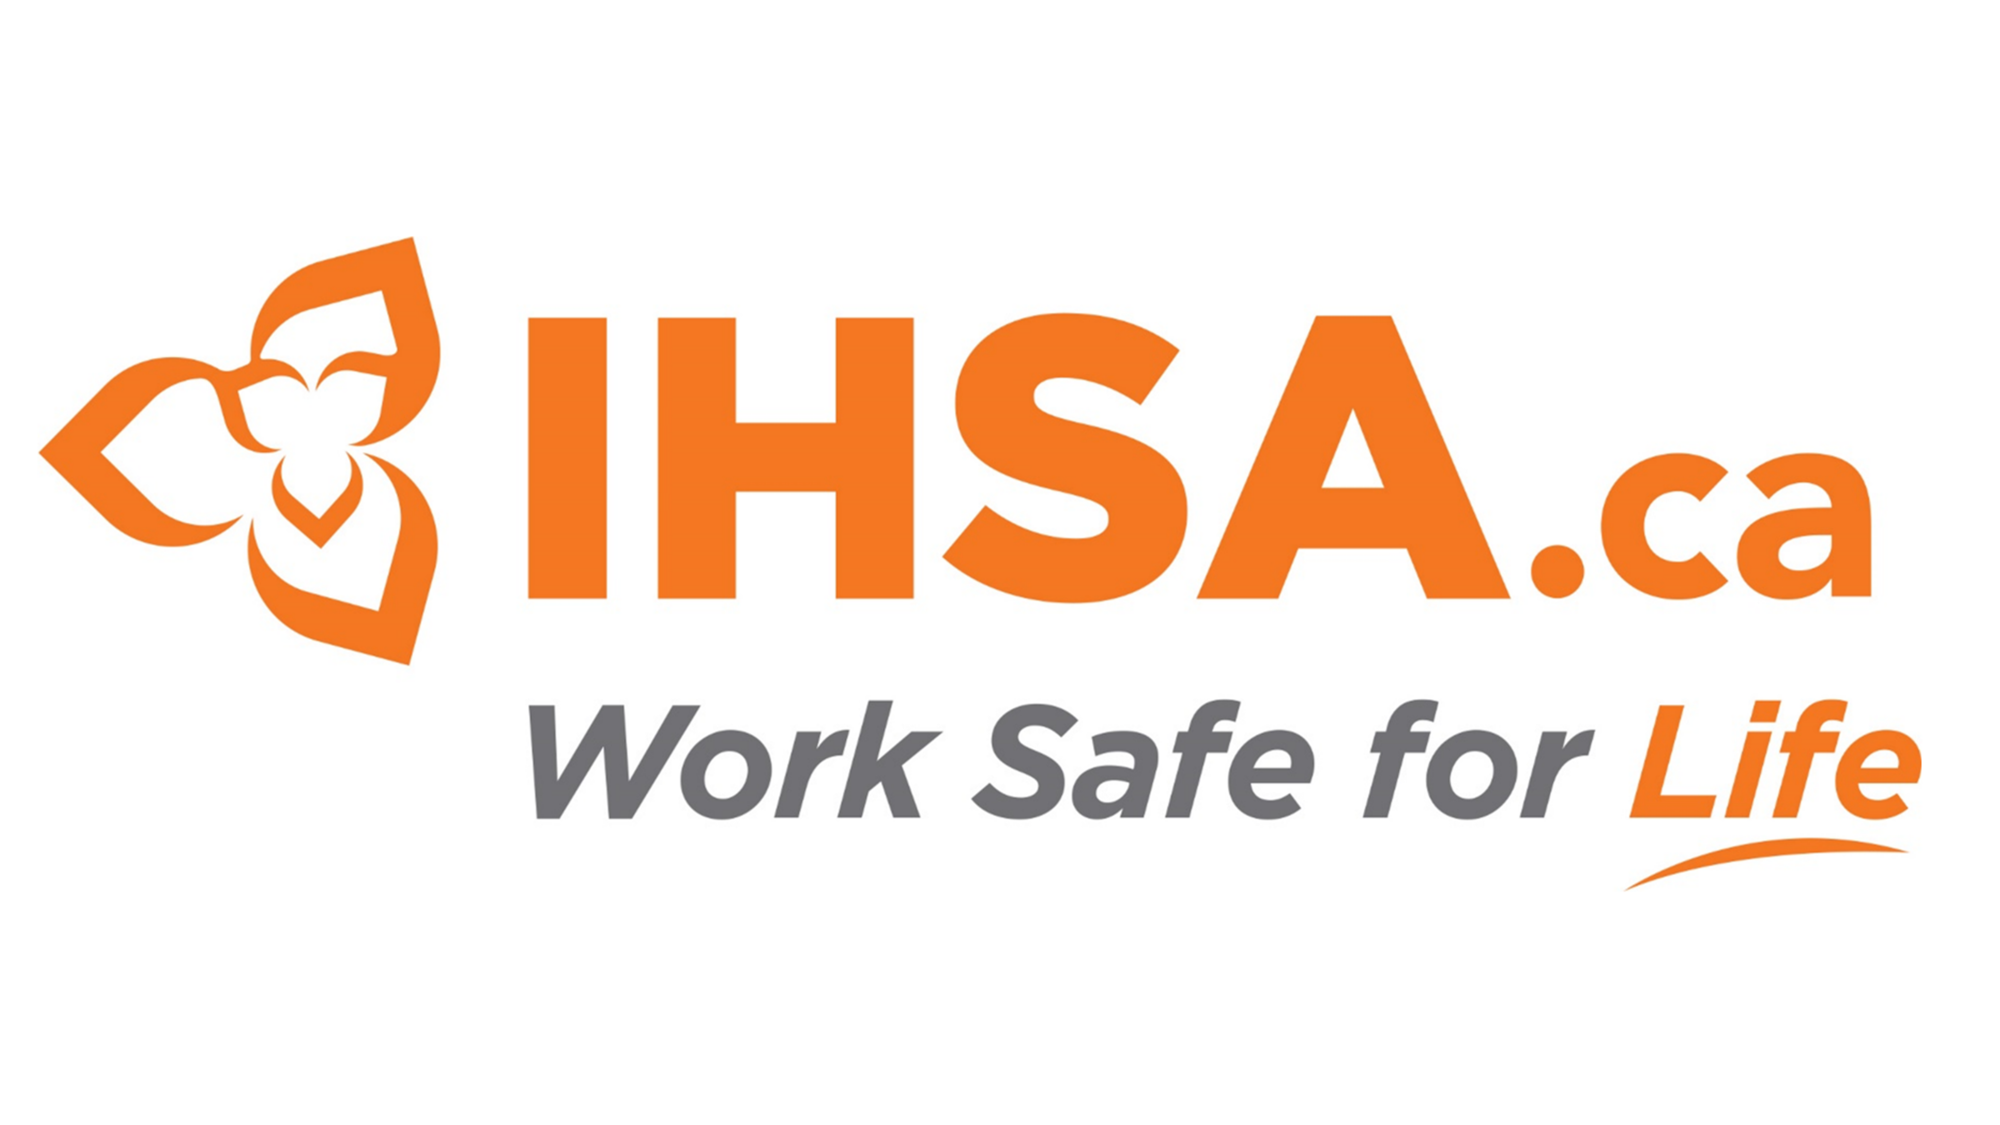 Infrastructure Health and Safety Association